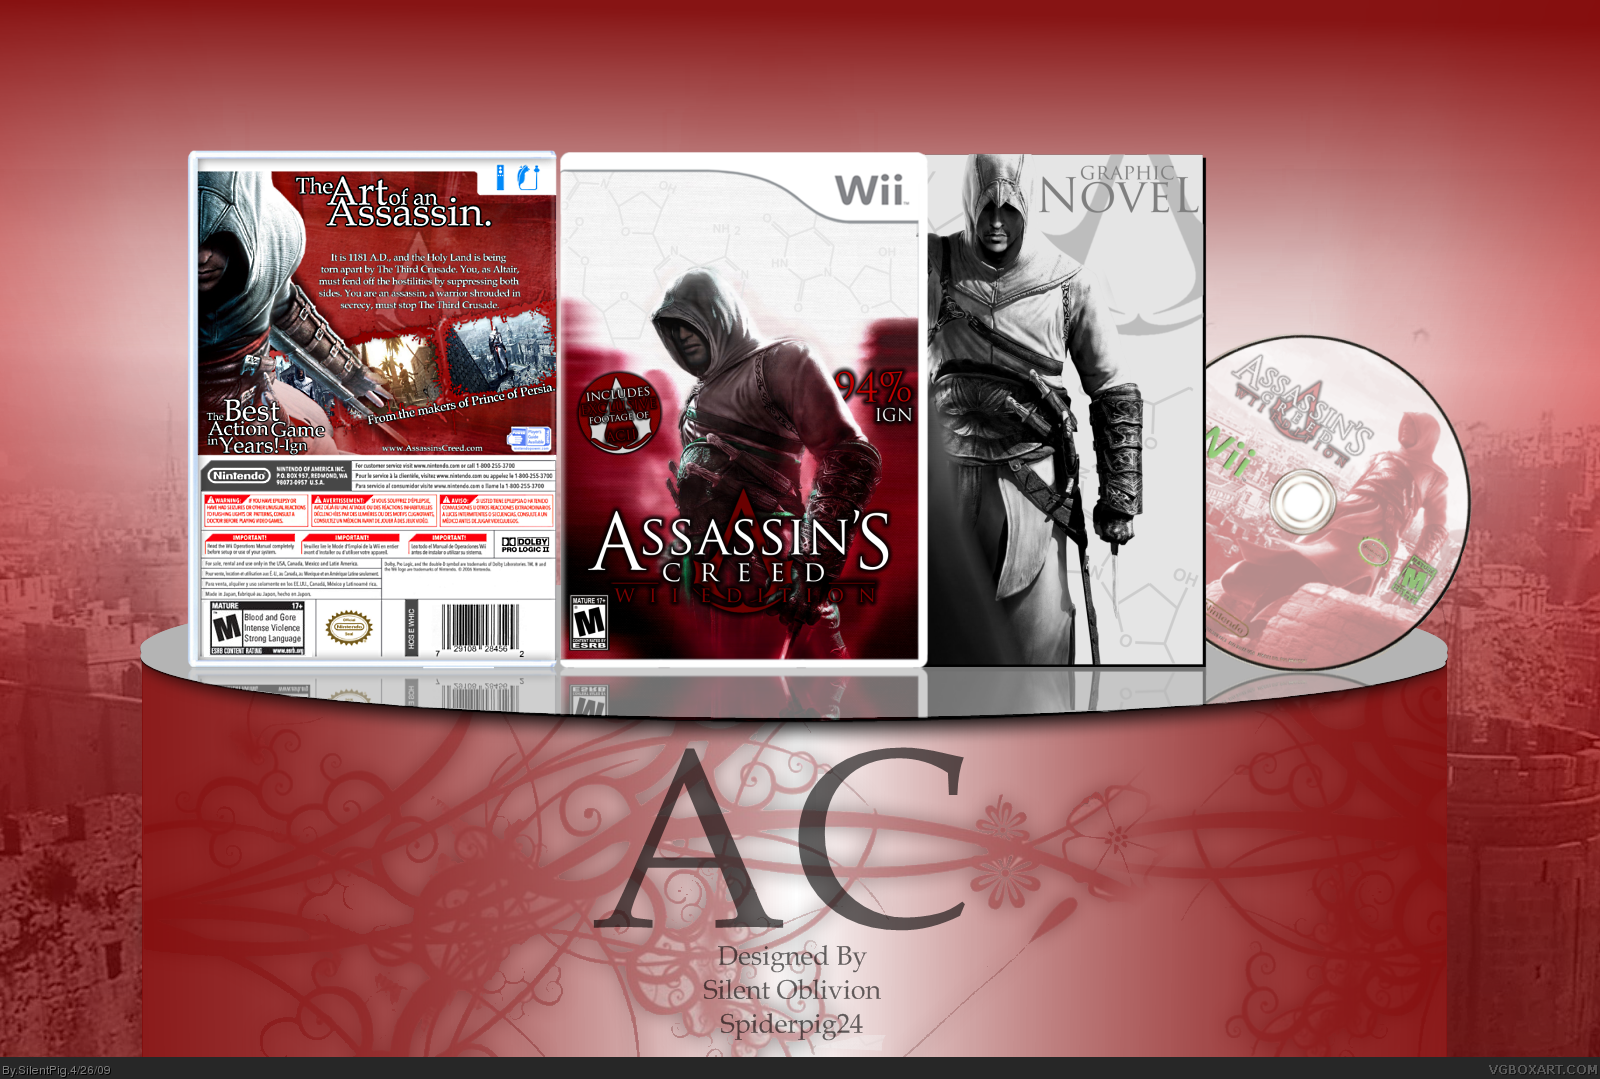 Assassins Creed Wii Edition box cover